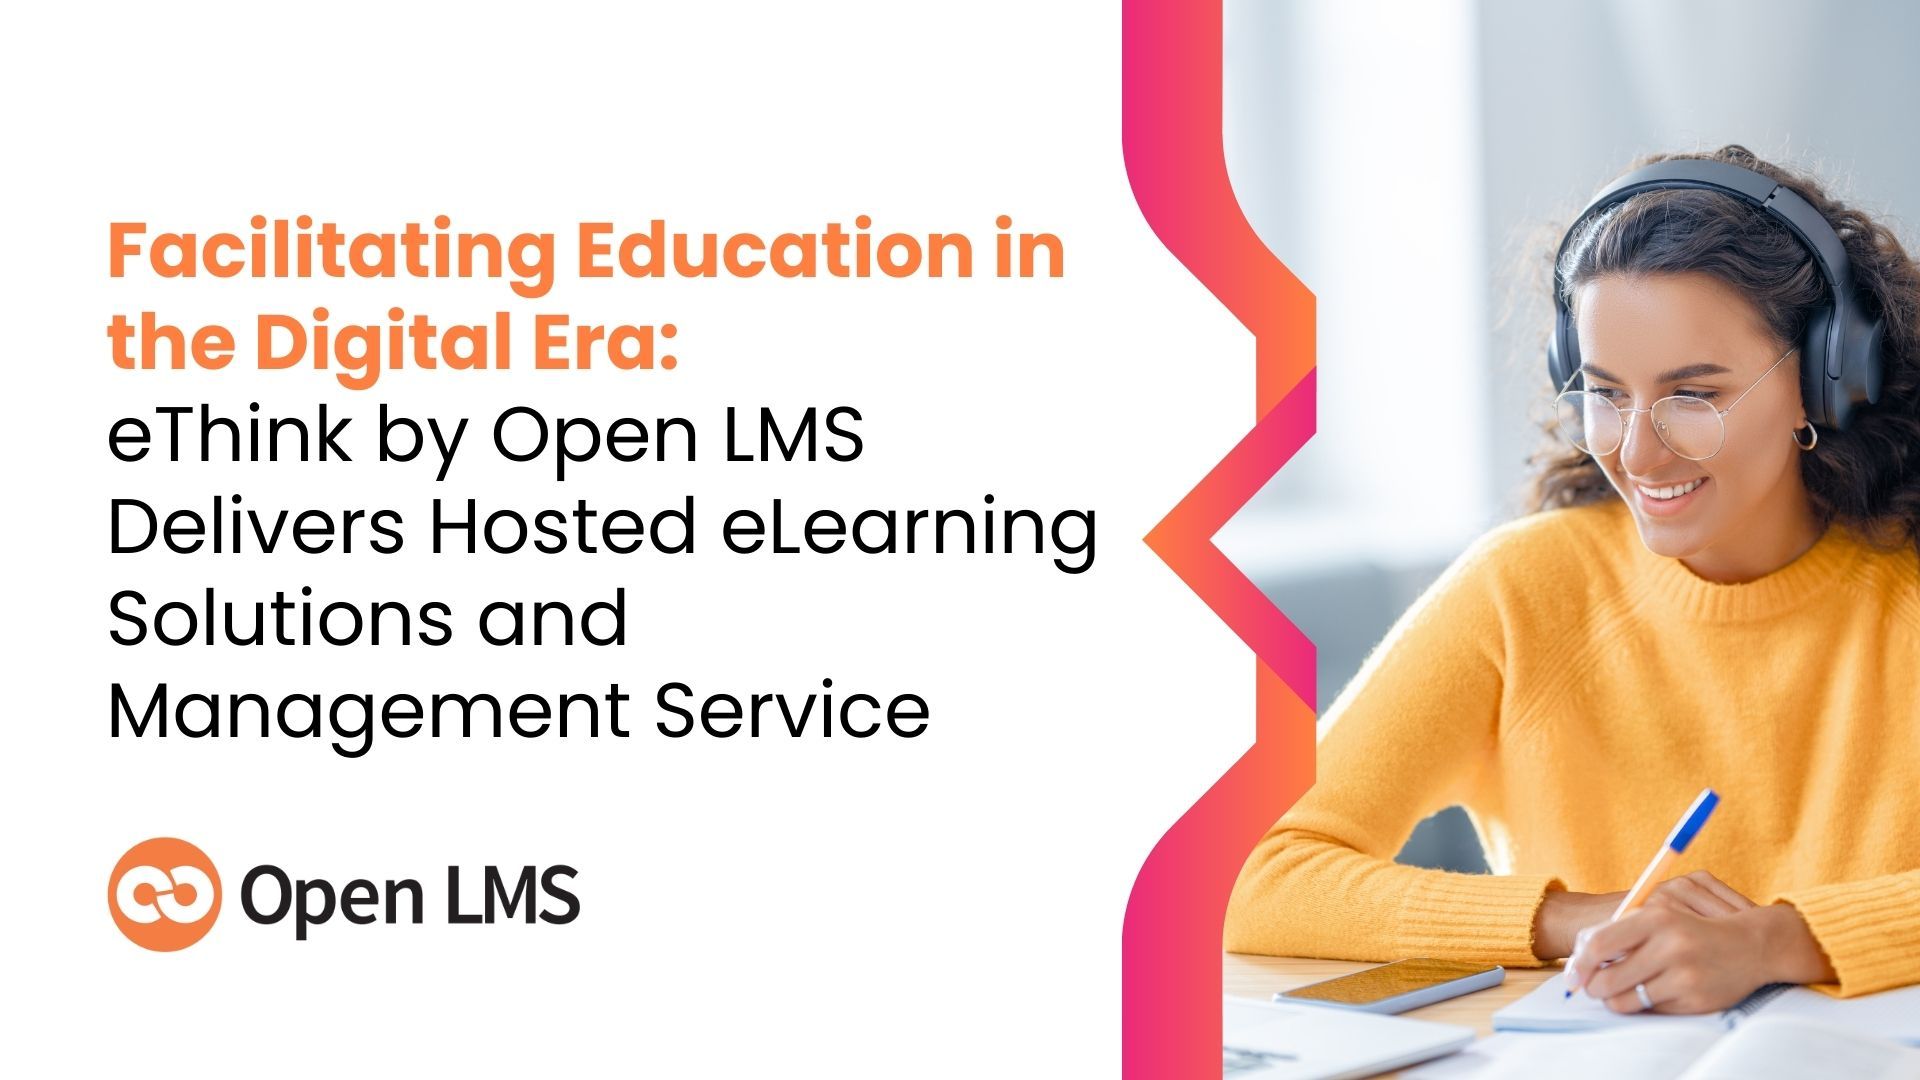 Facilitating Education in the Digital Era: eThink by Open LMS Delivers Hosted eLearning Solutions and Management Service